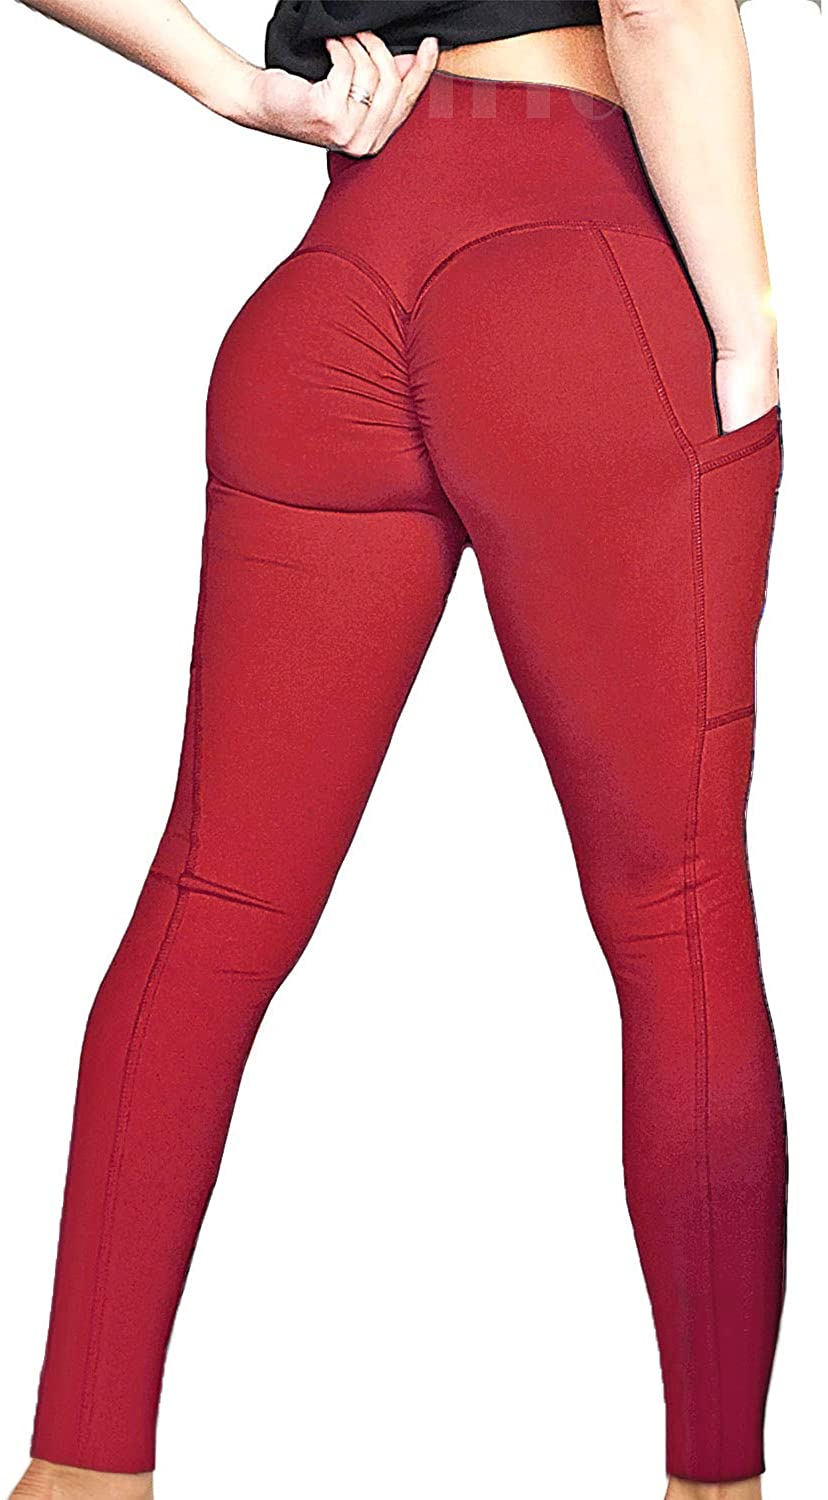 WOMENS SEXY GYM LEGGINGS YOGA PANTS FITNESS TROUSERS RED SIZE SMALL BRAND  NEW